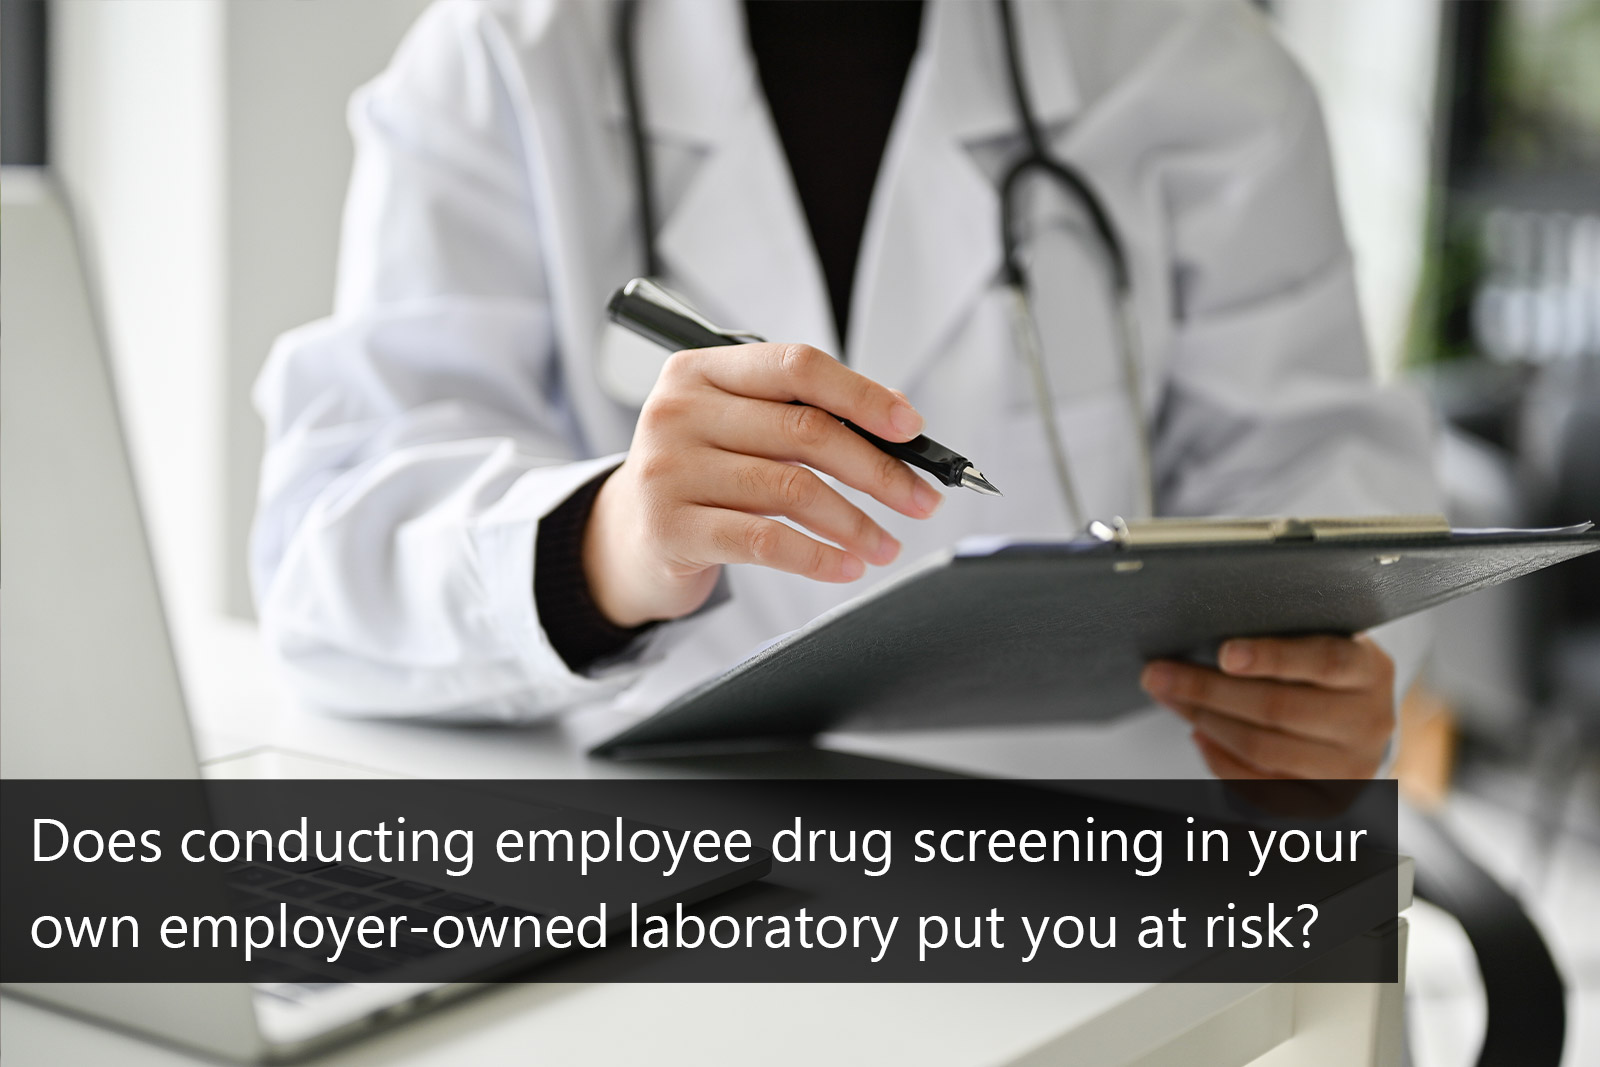 Risks of Employee Drug Tests in Employer-Owned Labs